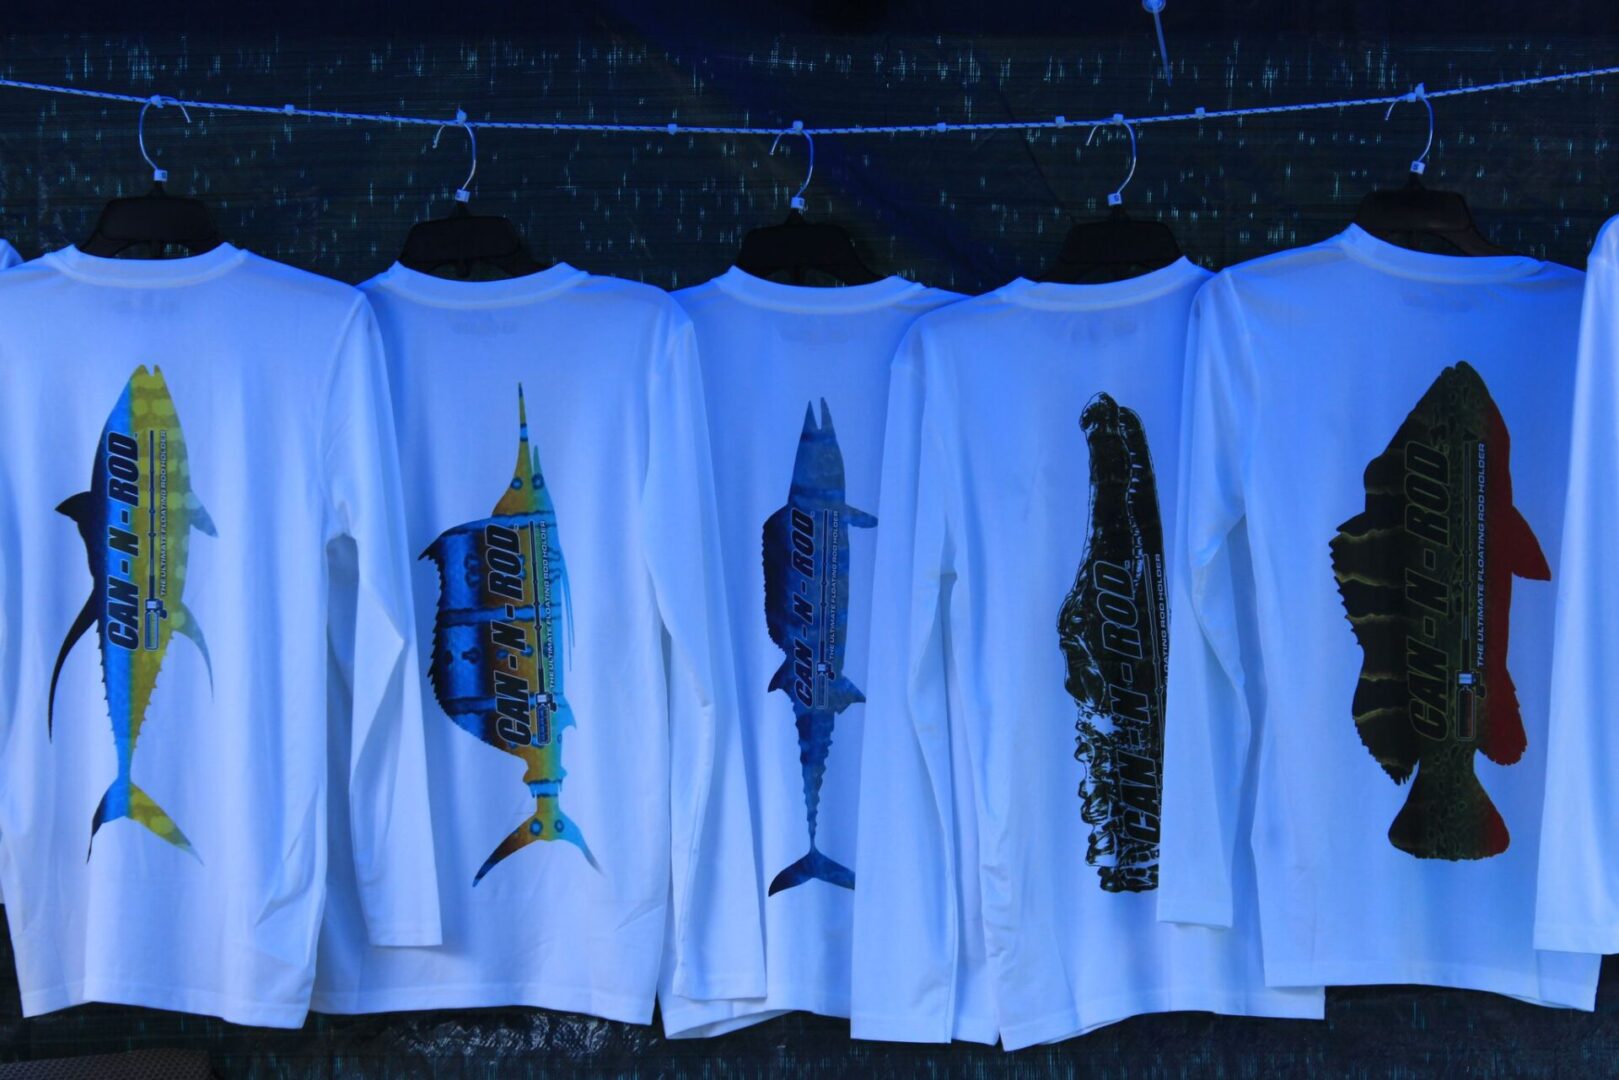 A group of fish on shirts hanging from clothes line.